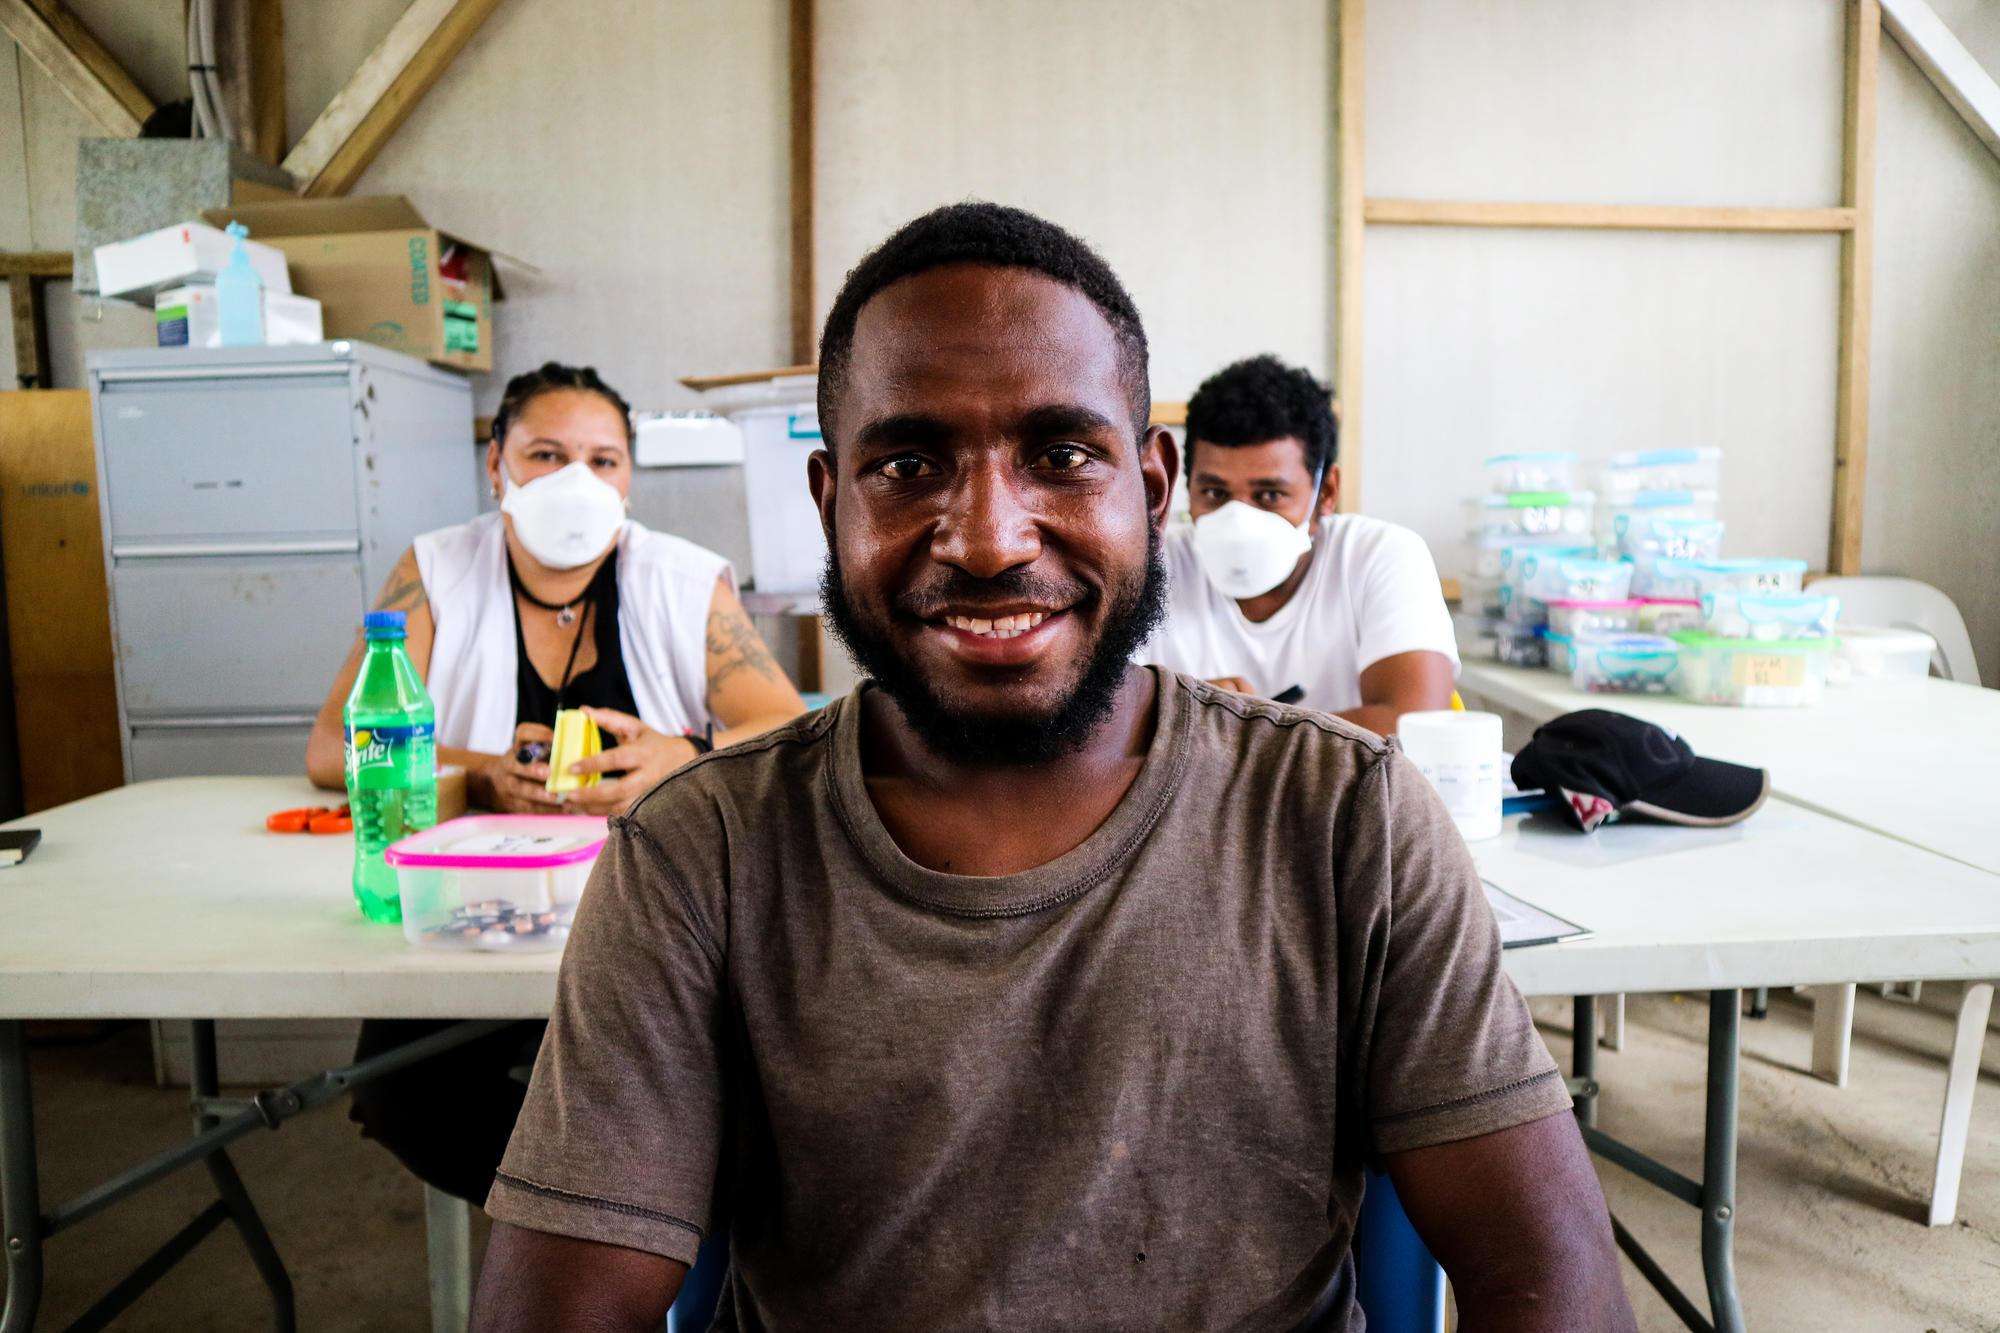 Brian Andrew goes to the MSF TB clinic in Kerema every day to take his medication under supervision. Gulf Province, Papua New Guinea, June 2019.